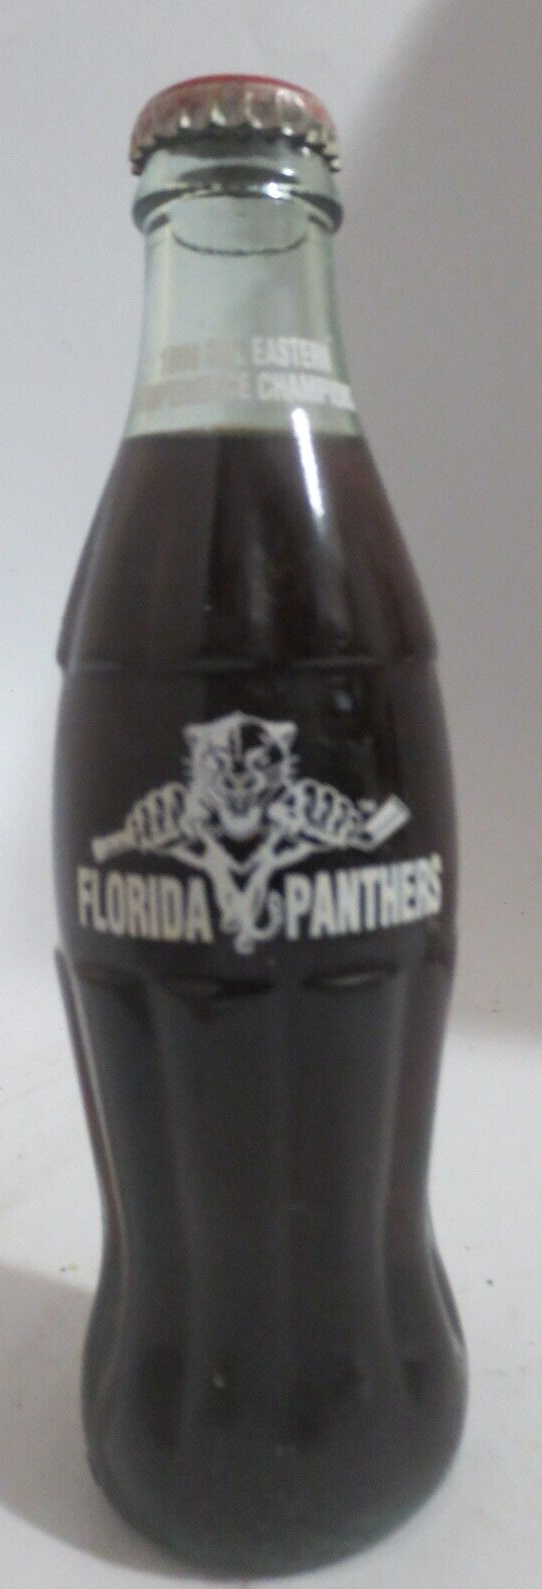 Primary image for Coca-Cola Classic FLORIDA PANTHERS 1996 NHL EASTERN CONF CHAMPS Bottle 8 oz Full